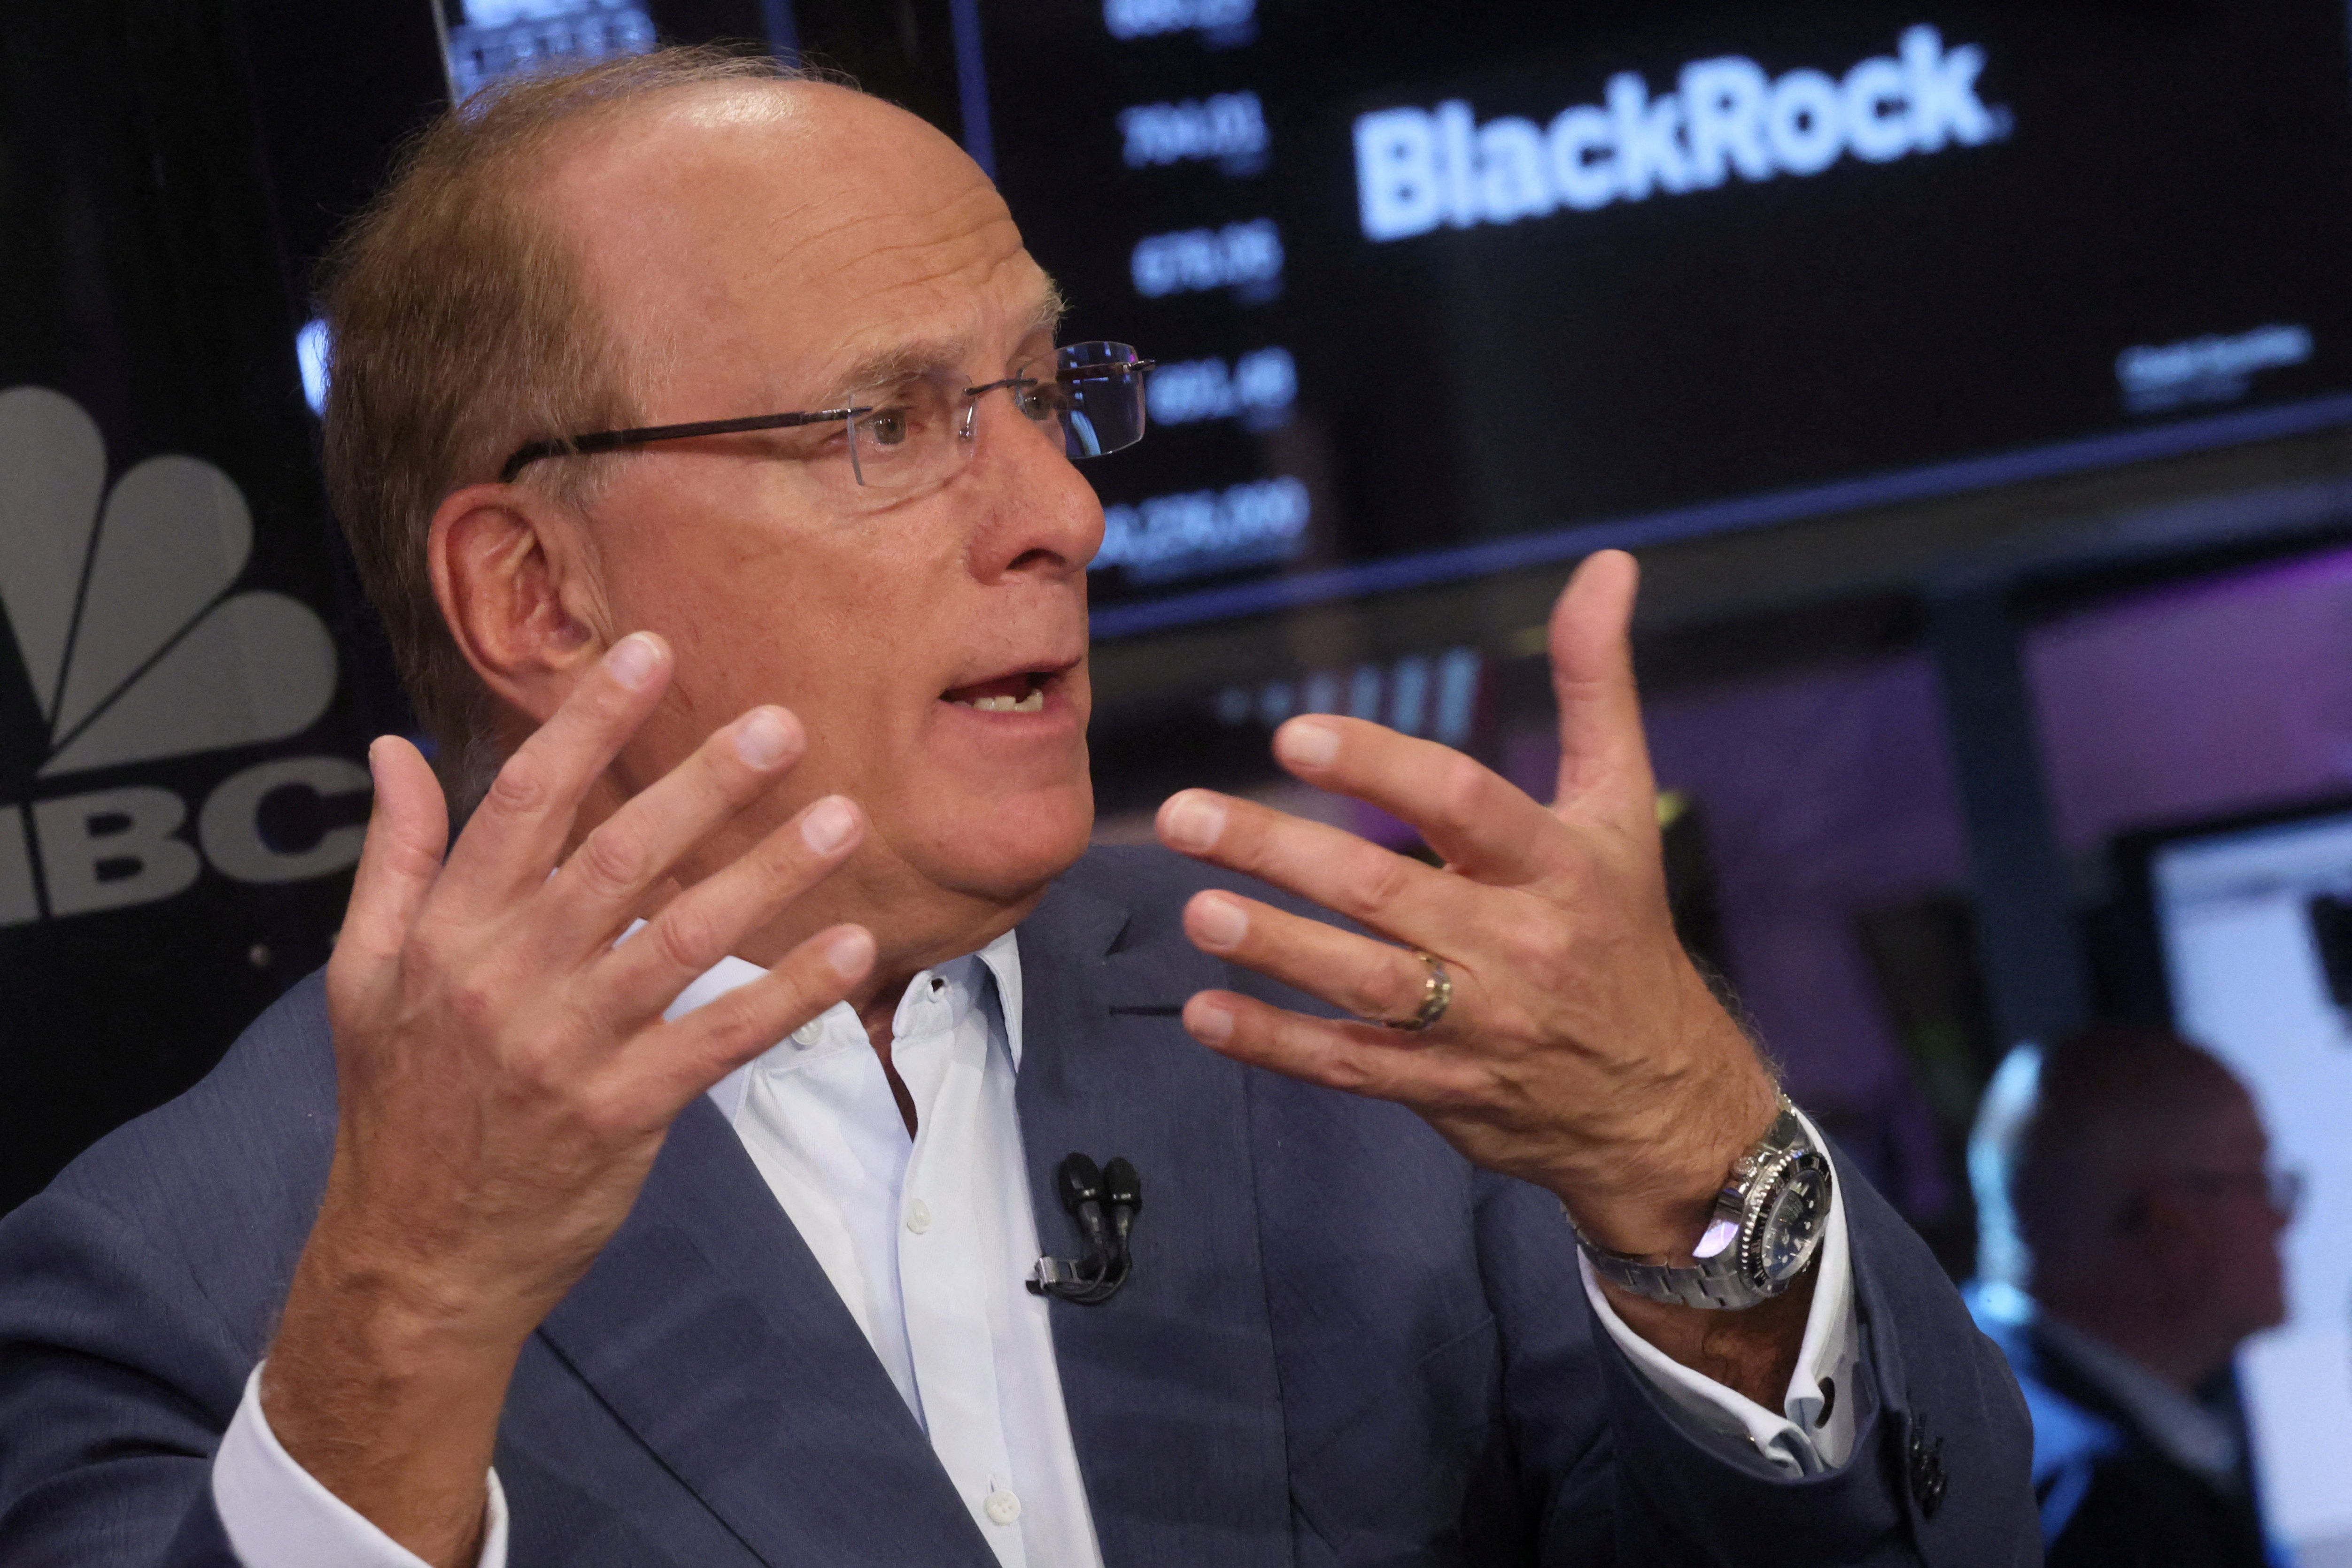 BlackRock Chairman and CEO Larry Fink at the NYSE in New York